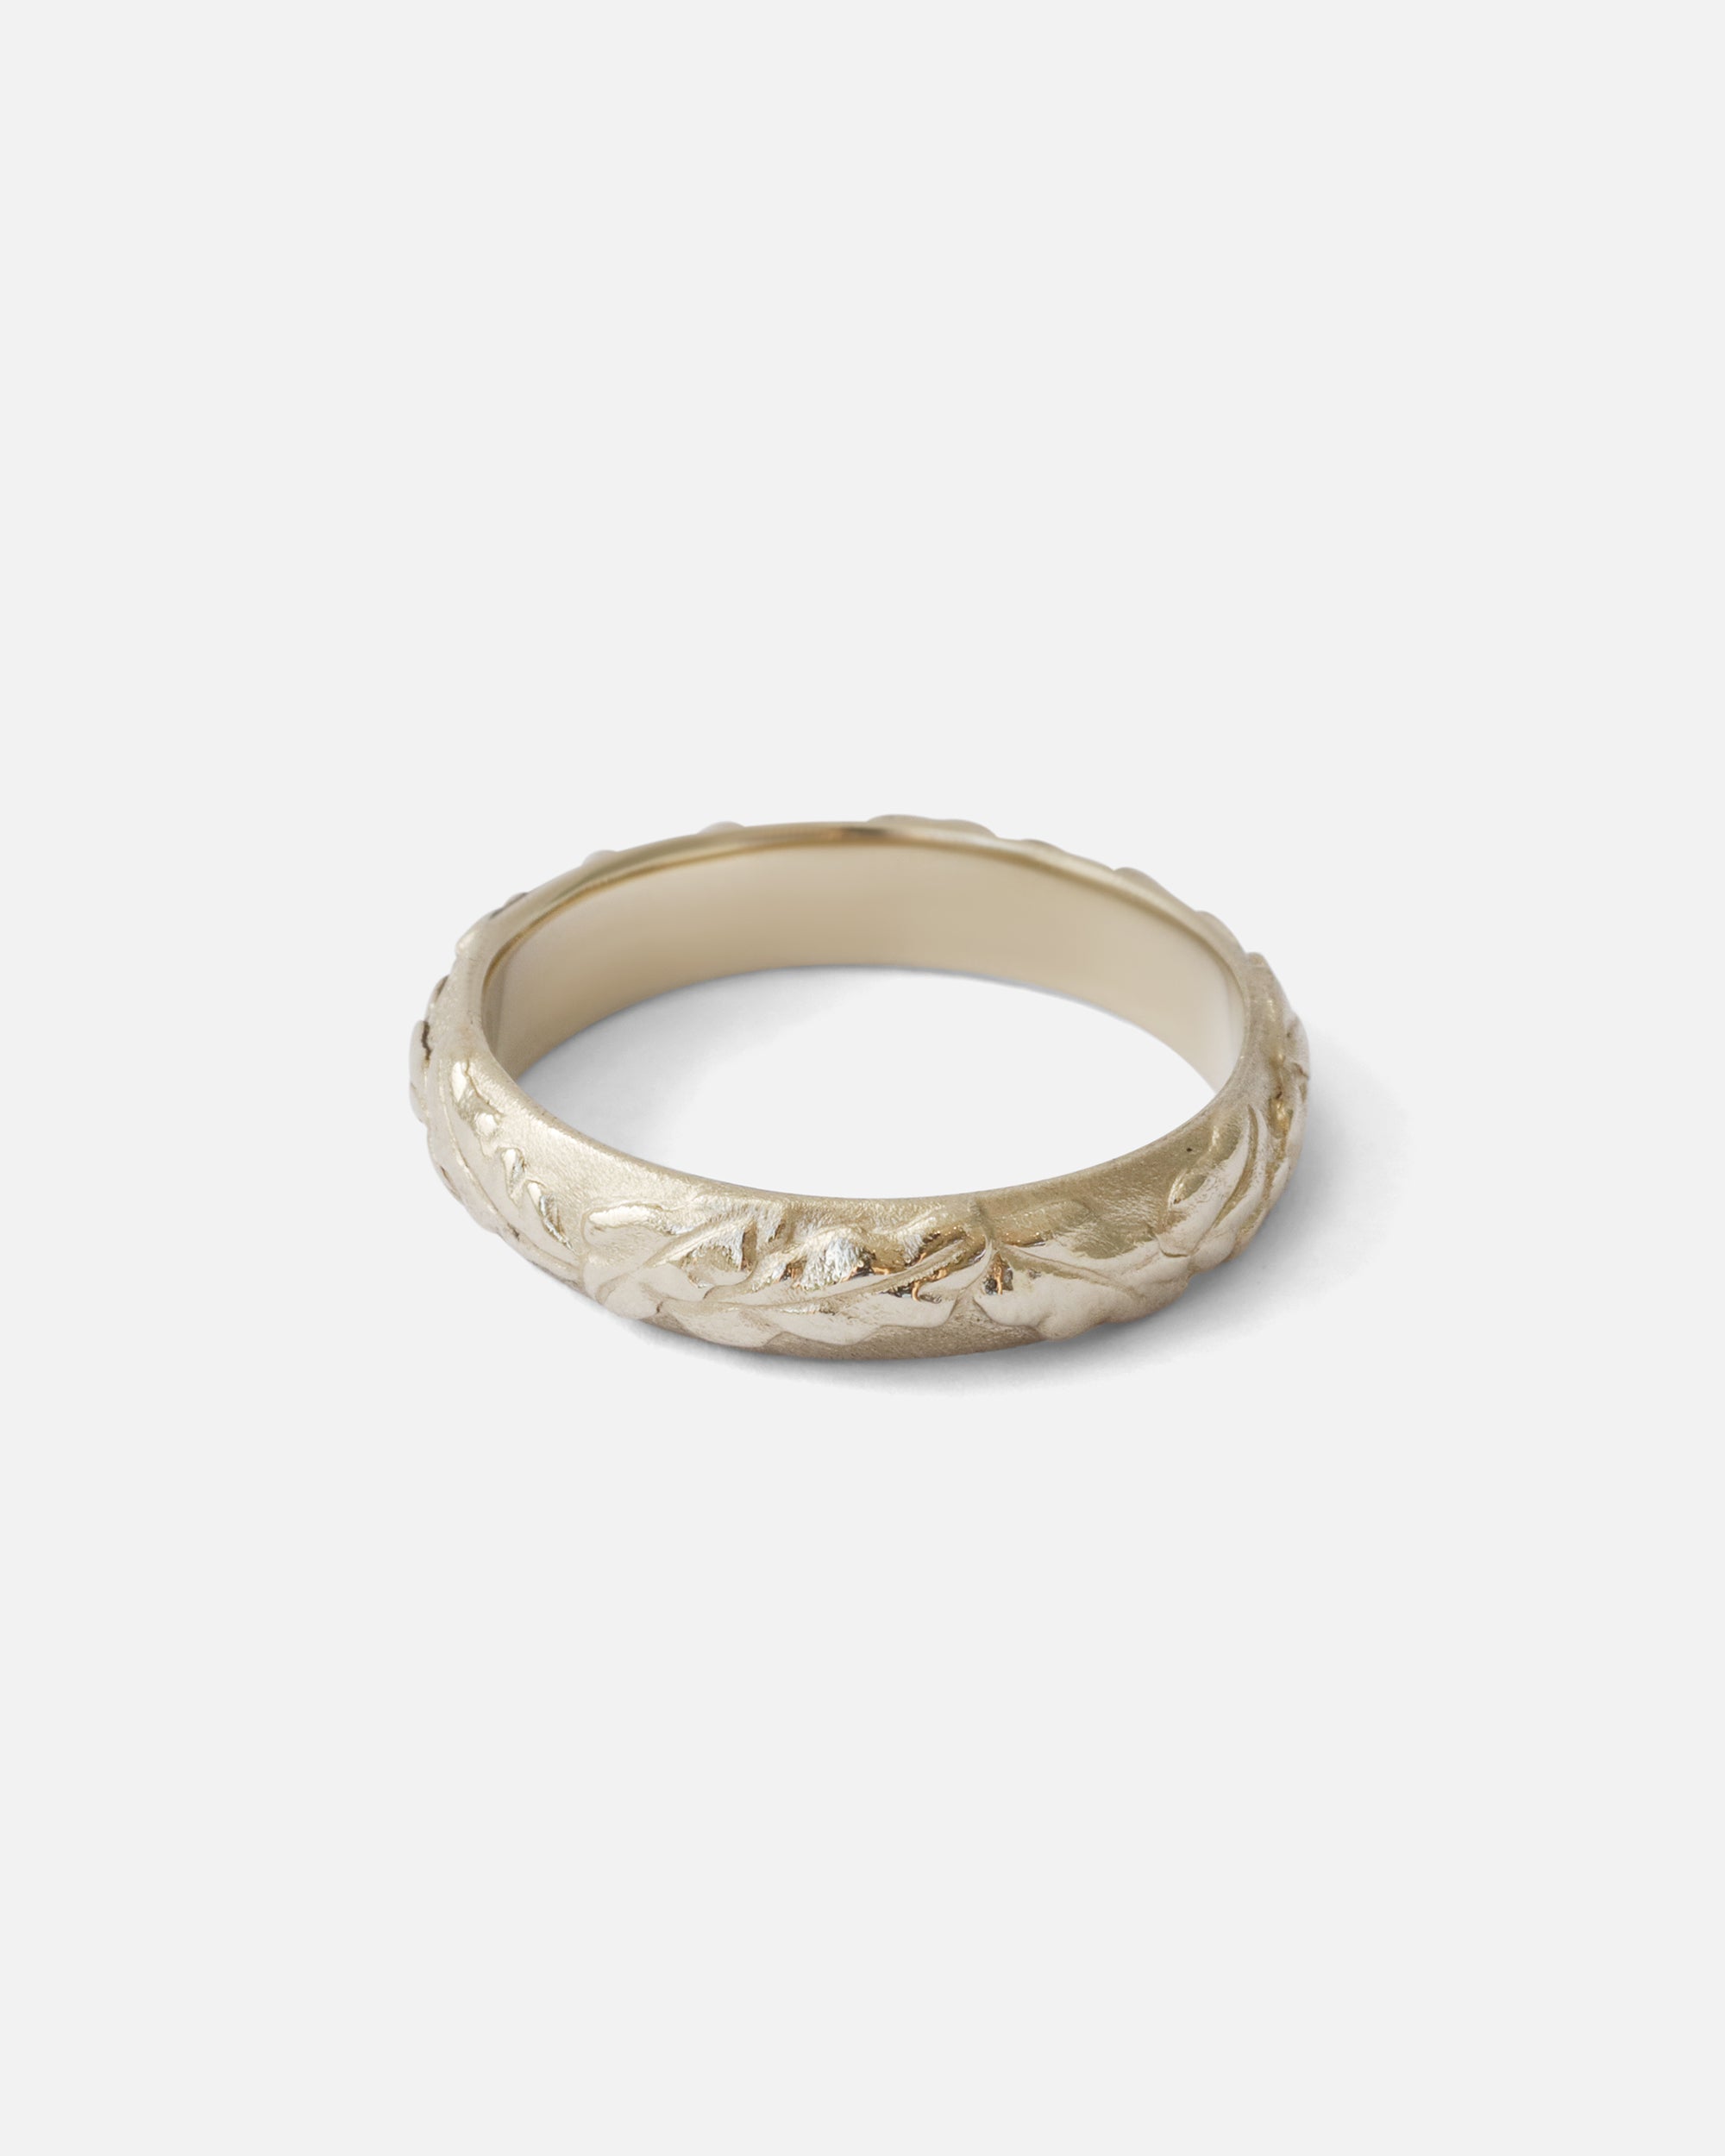 Oak Band By O Channell Designs